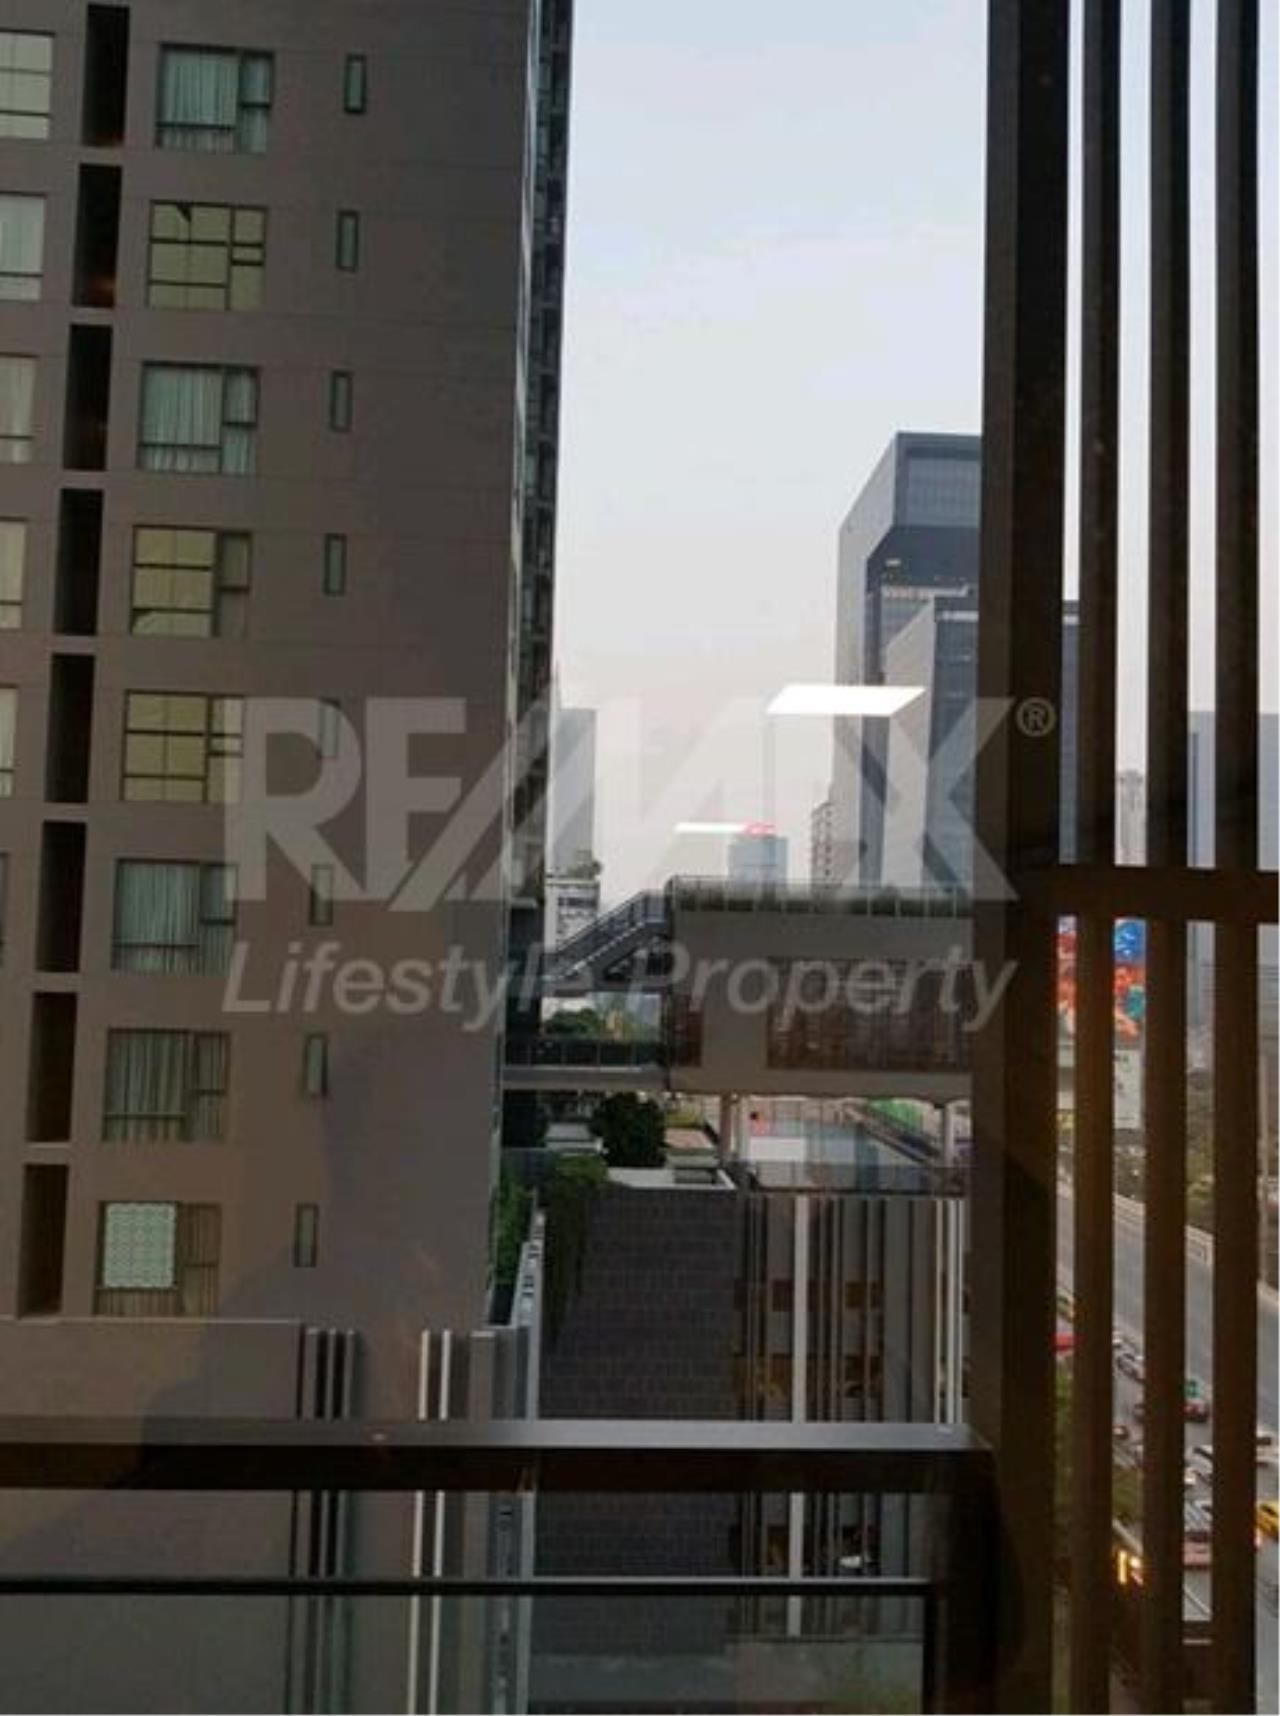 RE/MAX LifeStyle Property Agency's Chewathai Residence Asoke 6